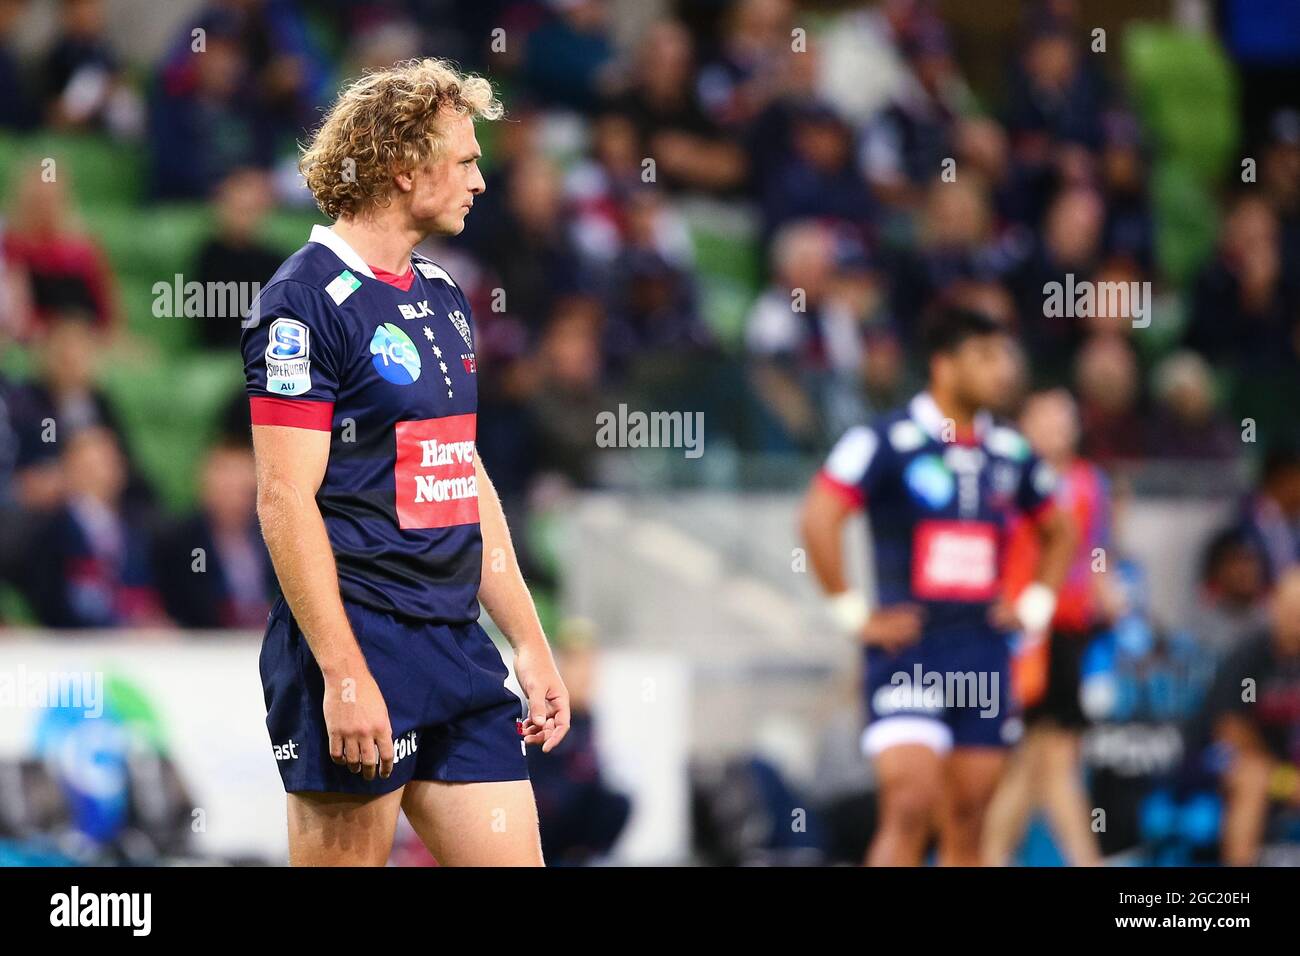 MELBOURNE, AUSTRALIA - APRIL 09: Joe Powell of the Melbourne Rebels during the round eight Super Rugby AU match between the Melbourne Rebels and Western Force at AAMI Park on April 09, 2021 in Melbourne, Australia.  Credit: Dave Hewison/Speed Media/Alamy Live News Stock Photo